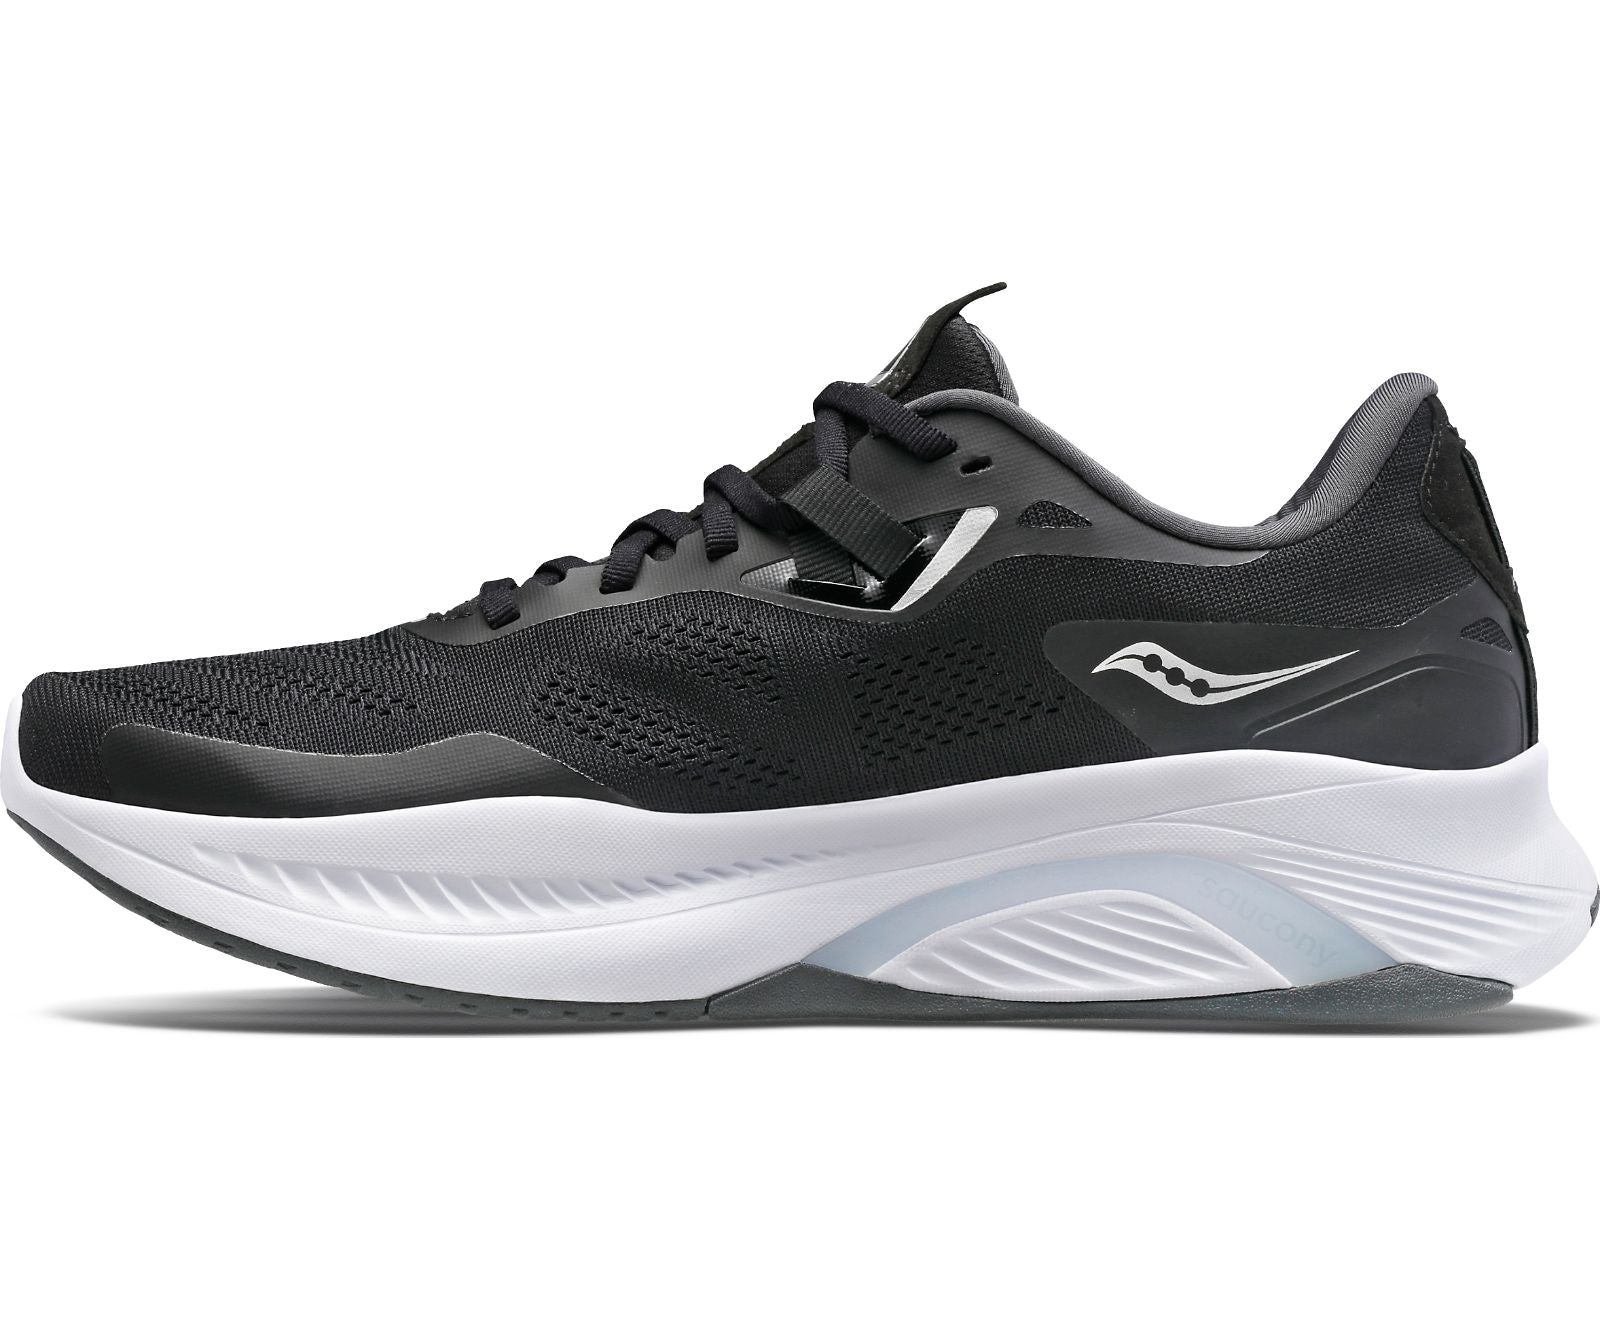 Medial view of the Women's Guide 15 by Saucony in Black/White